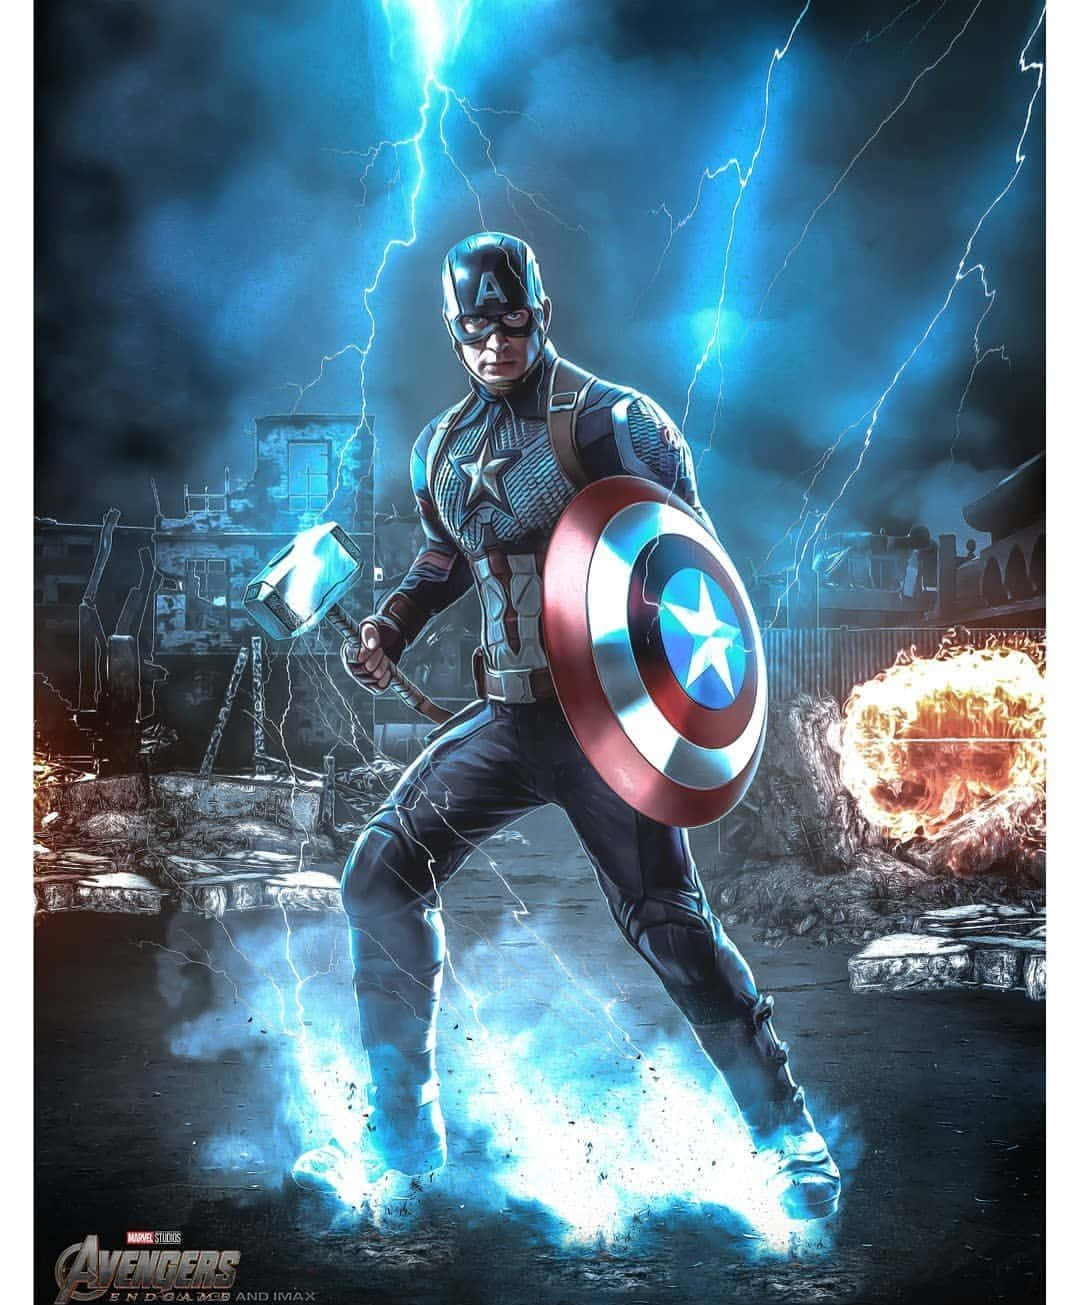 Captain America Poster Wallpapers